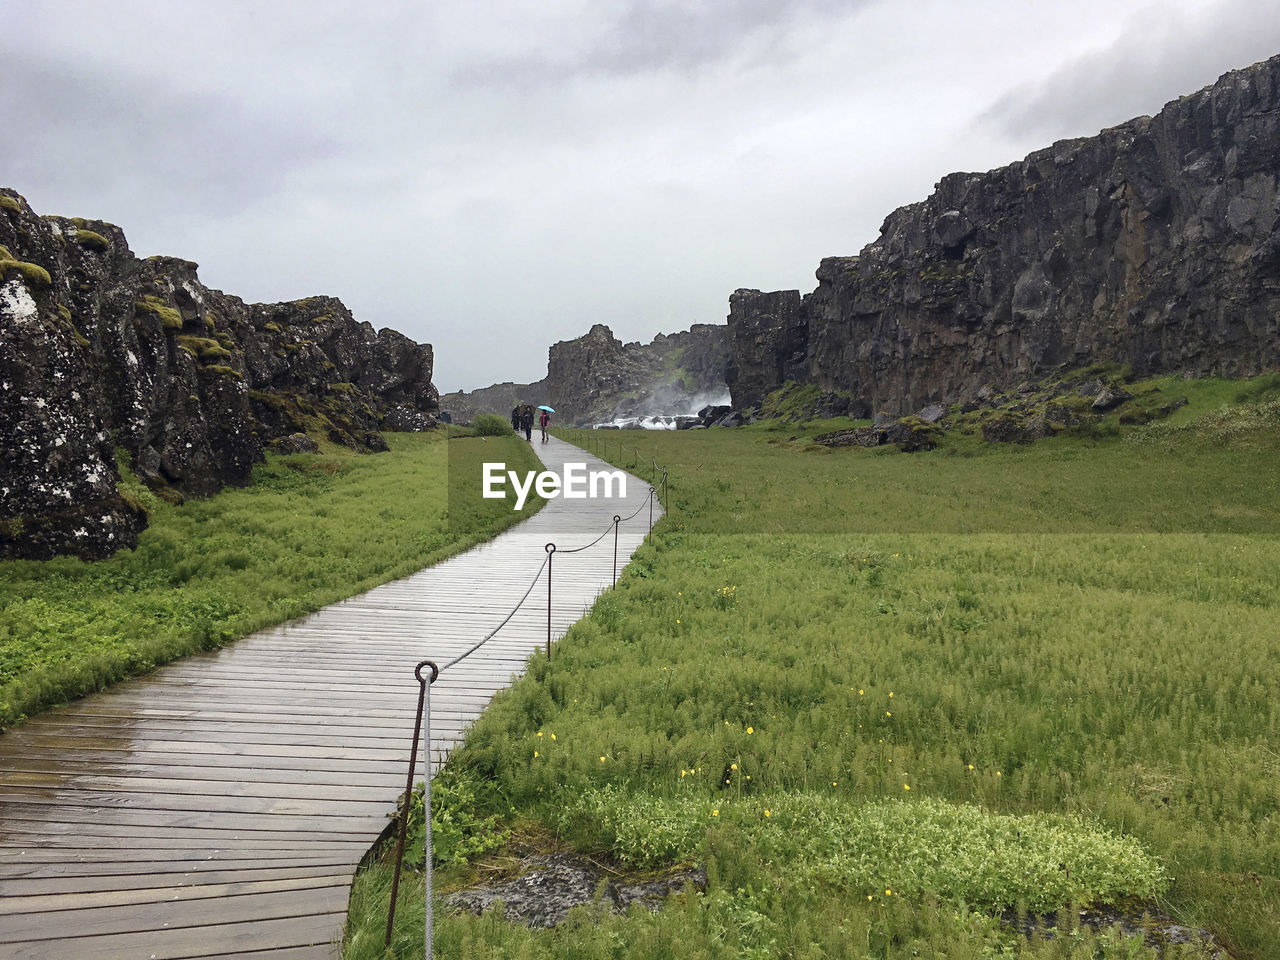 Boardwalk amidst grassy field and rock formations against cloudy sky